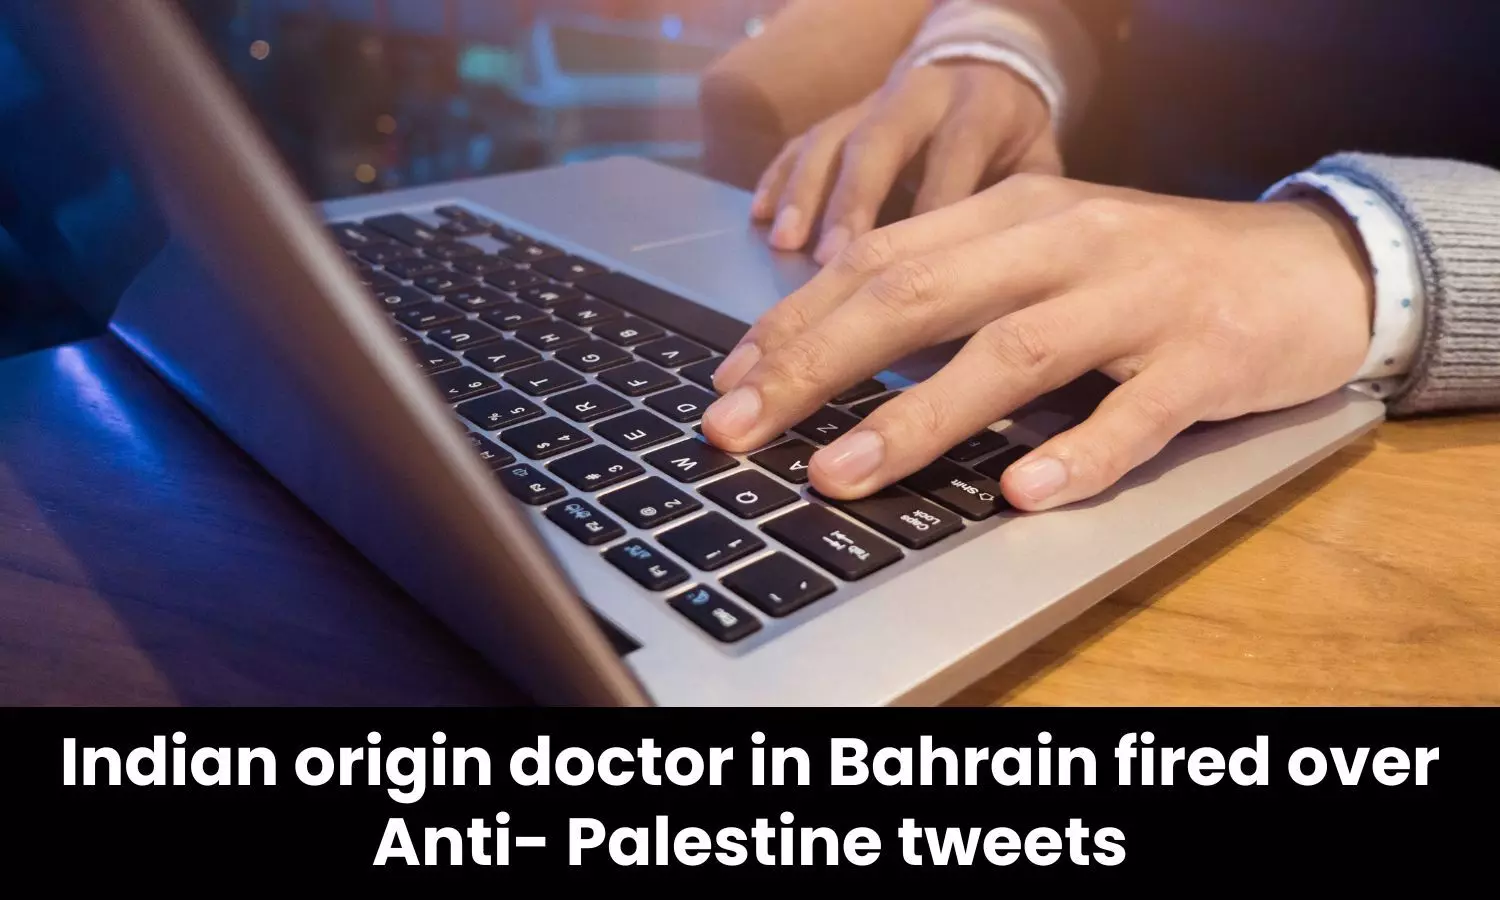 Indian origin doctor in Bahrain terminated from hospital over anti-palestine posts